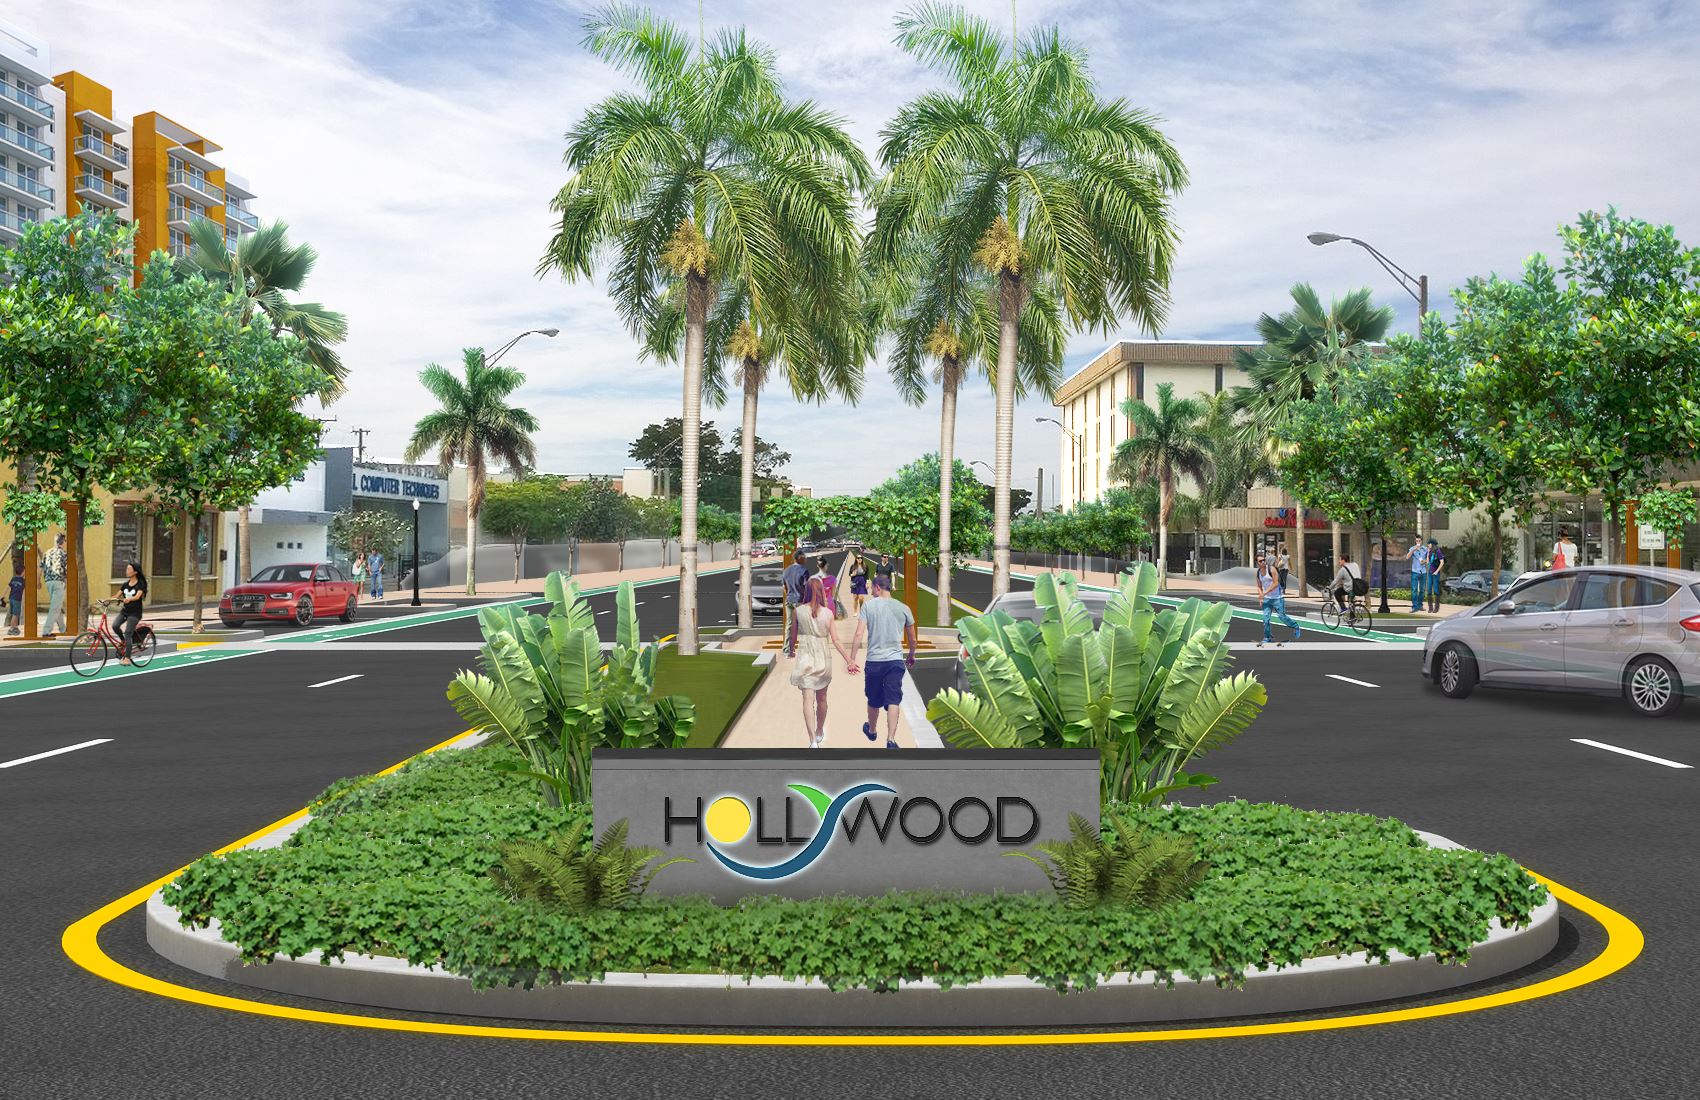 Hollywood Complete Streets Rendering